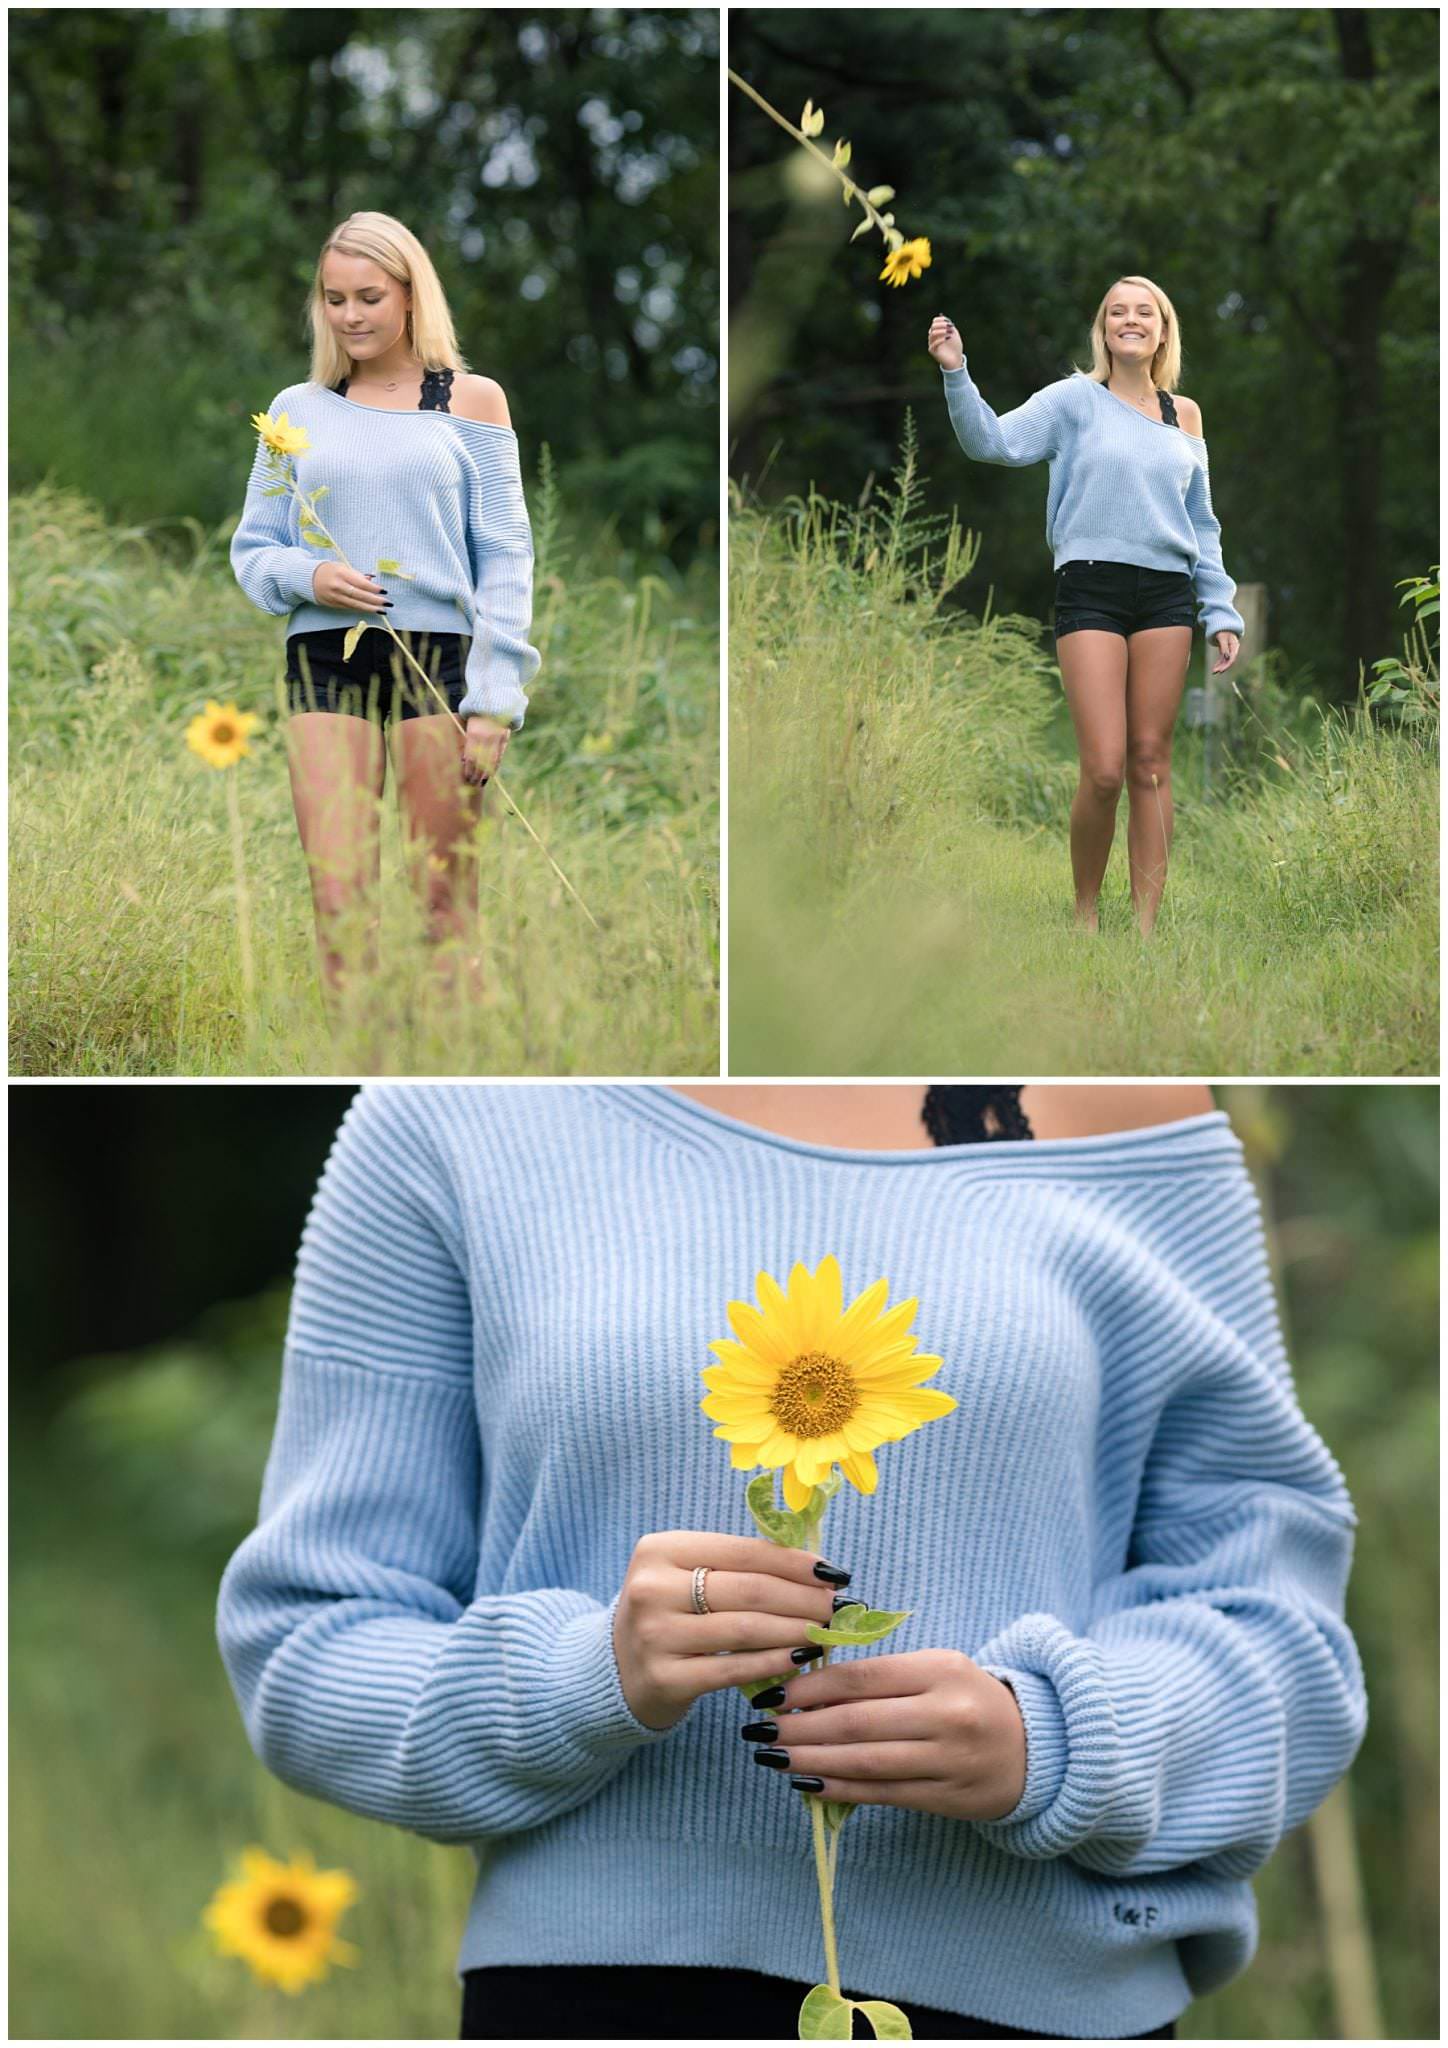 Outdoor senior portrait in field with sunflowers